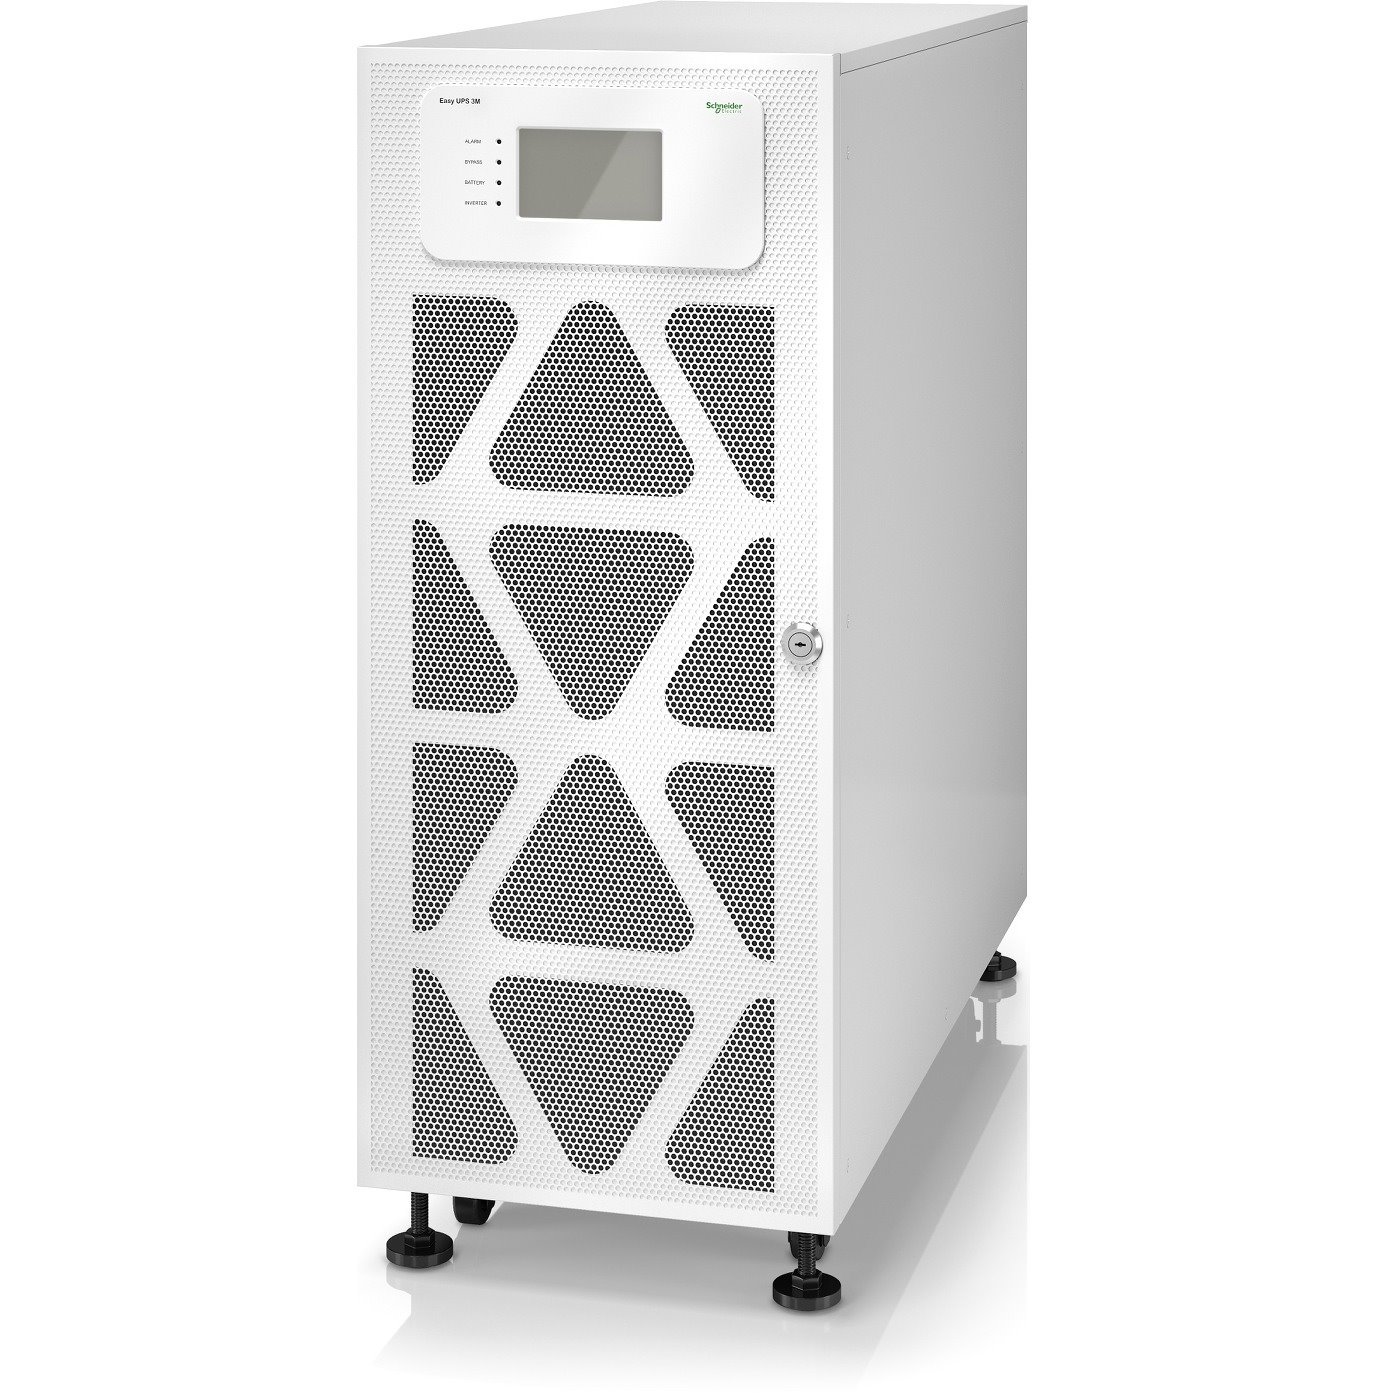 APC by Schneider Electric Easy UPS Dual Conversion Online UPS - 80 kVA - Three Phase